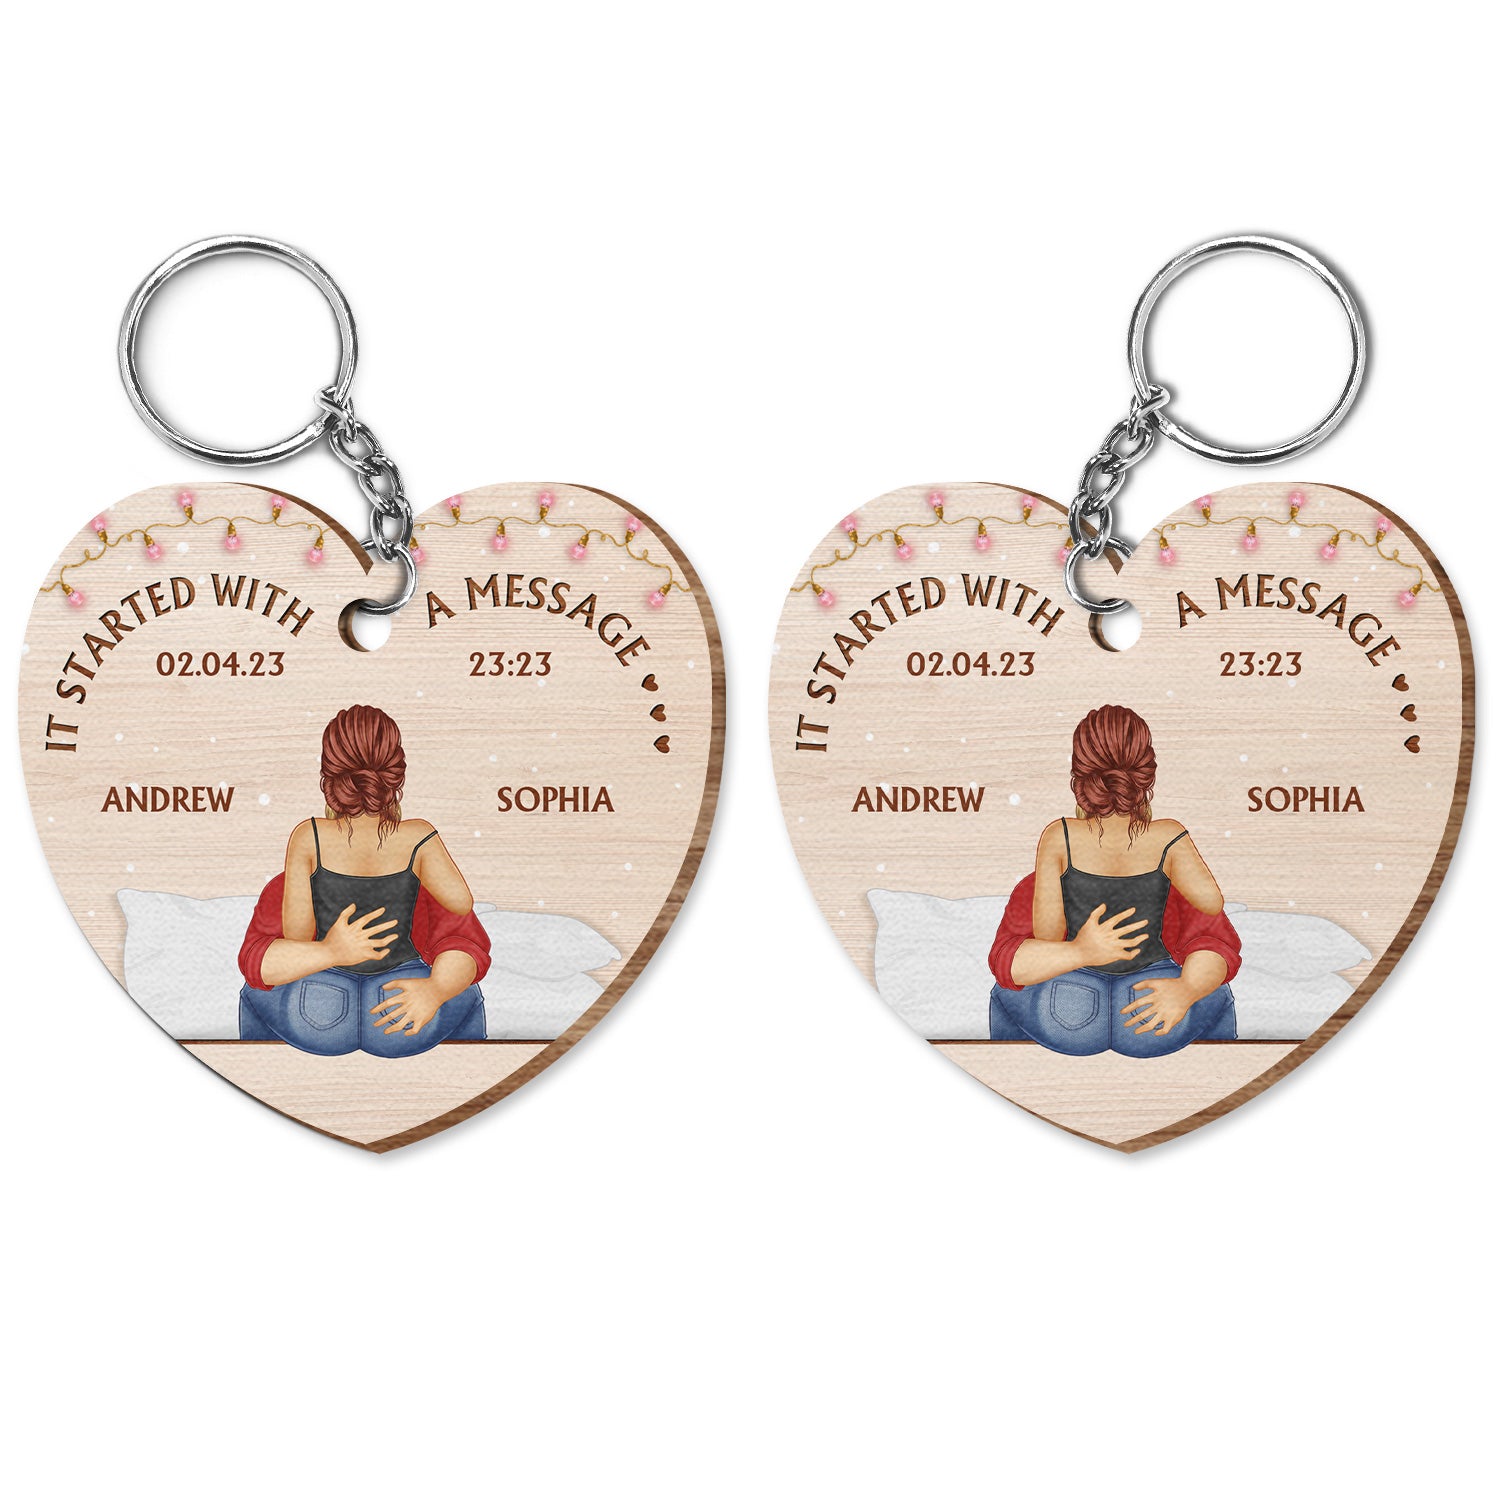 It Starts With A Message - Aniversary Gift For Couples - Personalized Wooden Keychain